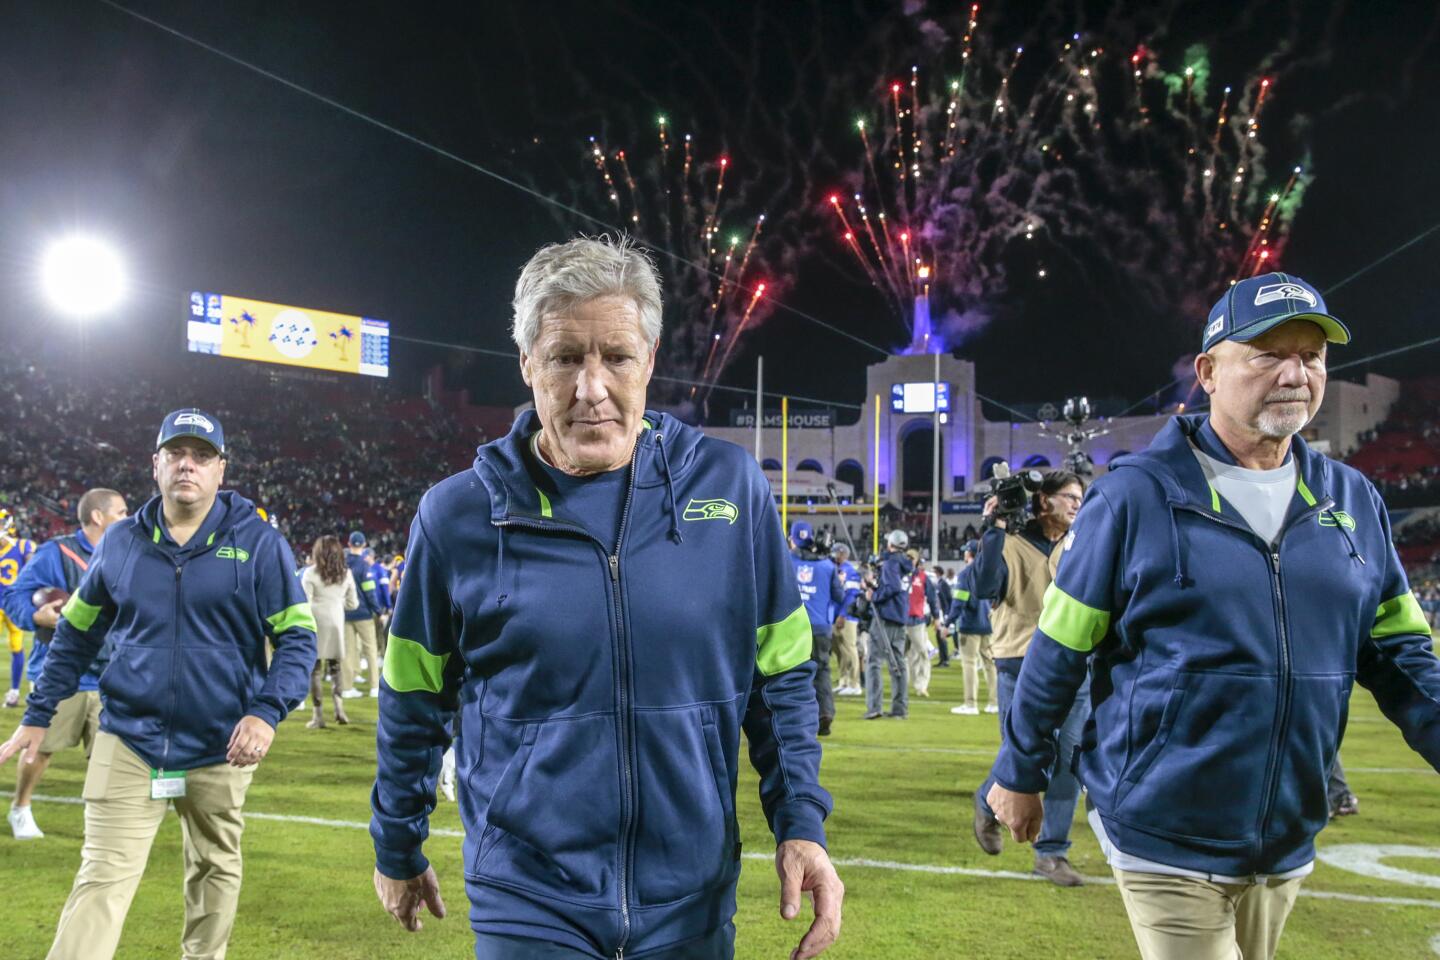 Seattle Seahawks coach Pete Carroll walks off the field at the Coliseum following the Rams' 28-12 victory.